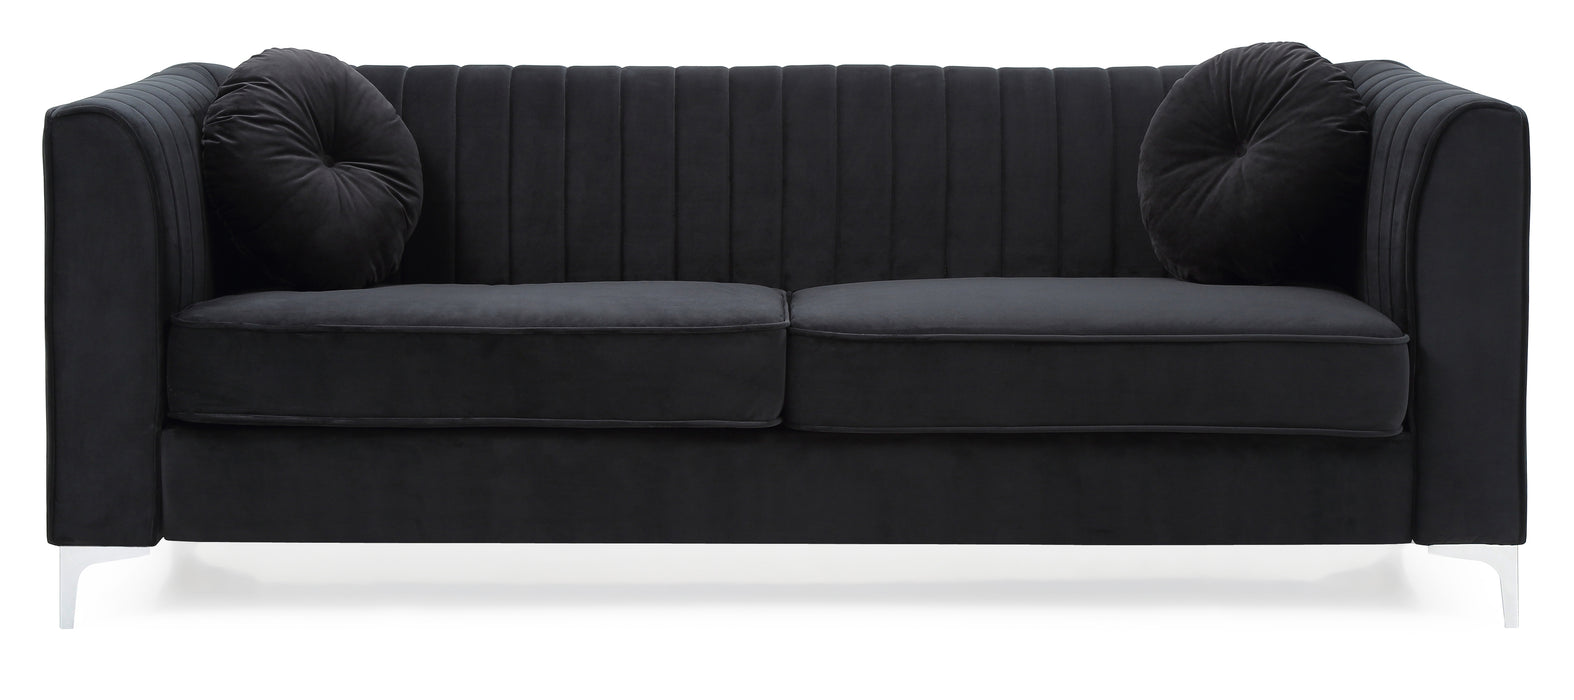 Glory Furniture Delray G793A-S Sofa ( 2 Boxes ) , Black G793A-S